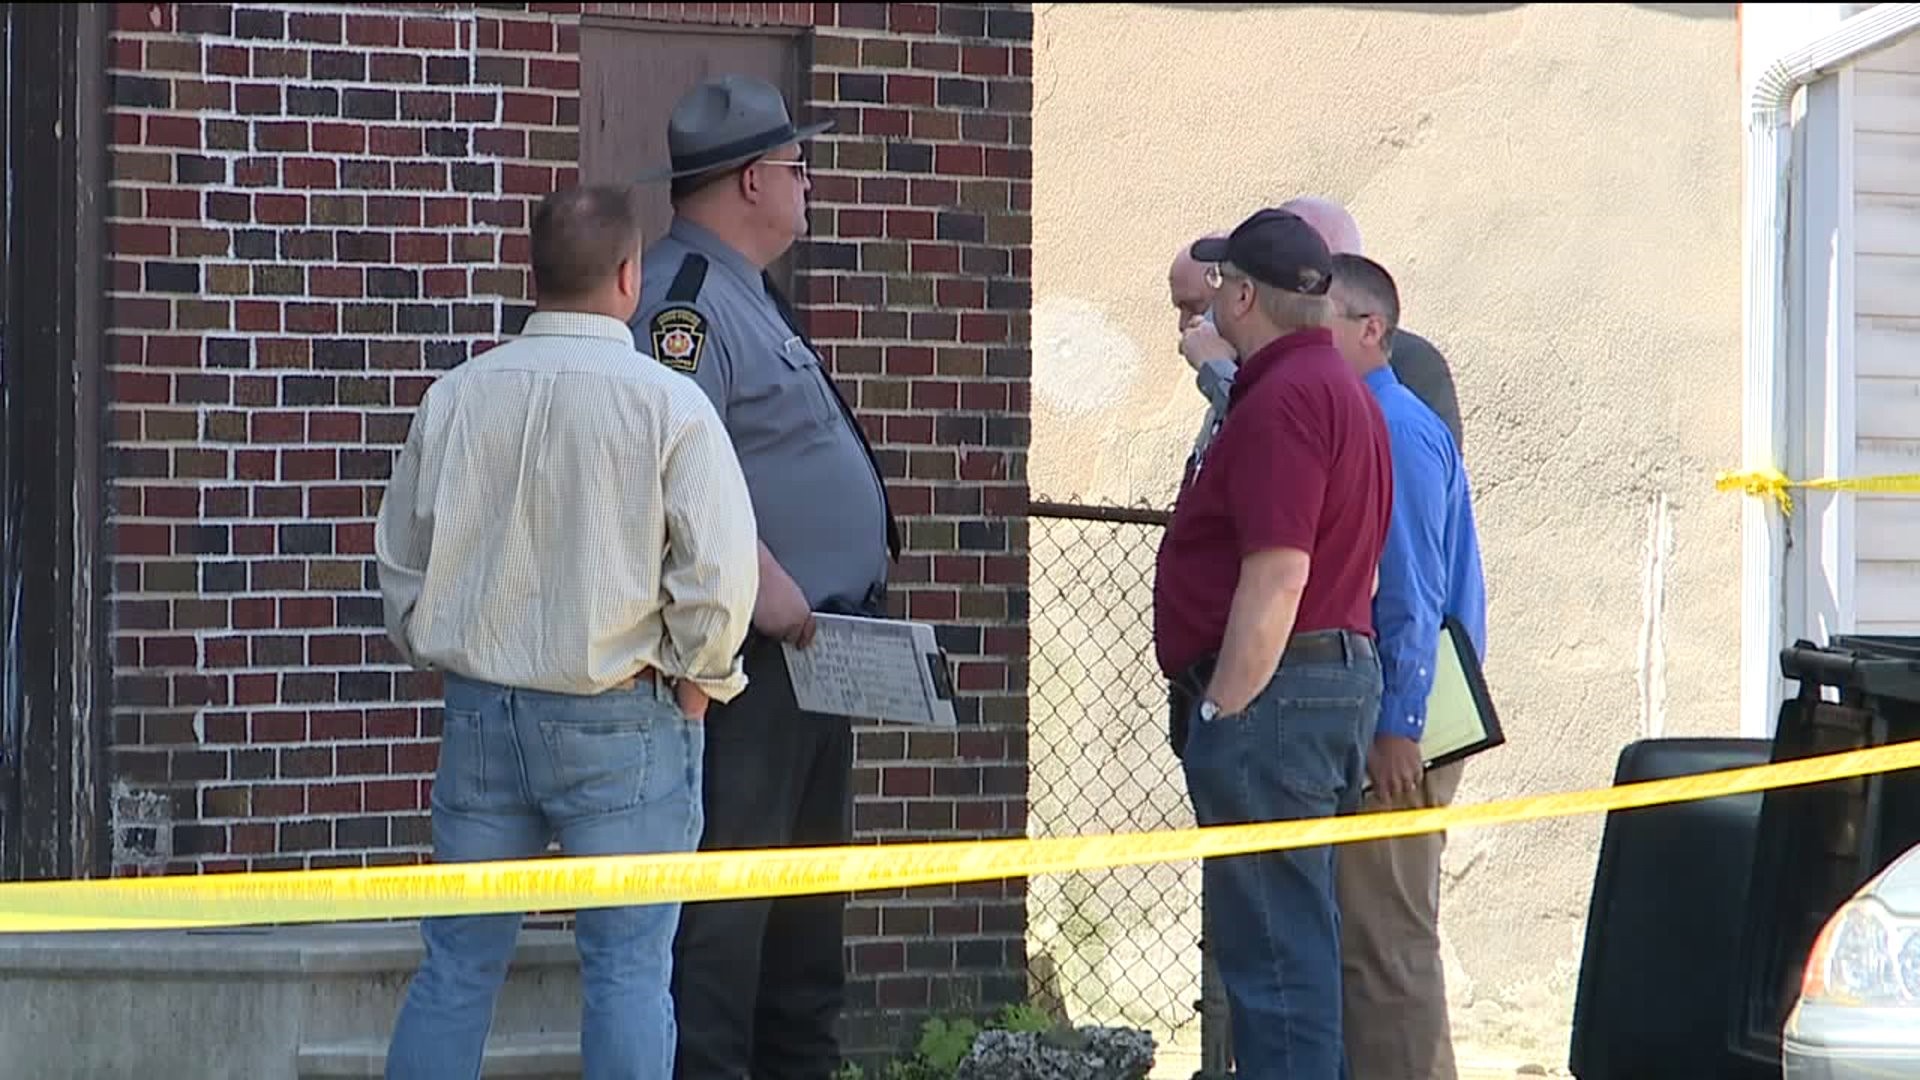 Man Found Dead in Nesquehoning Apartment Building